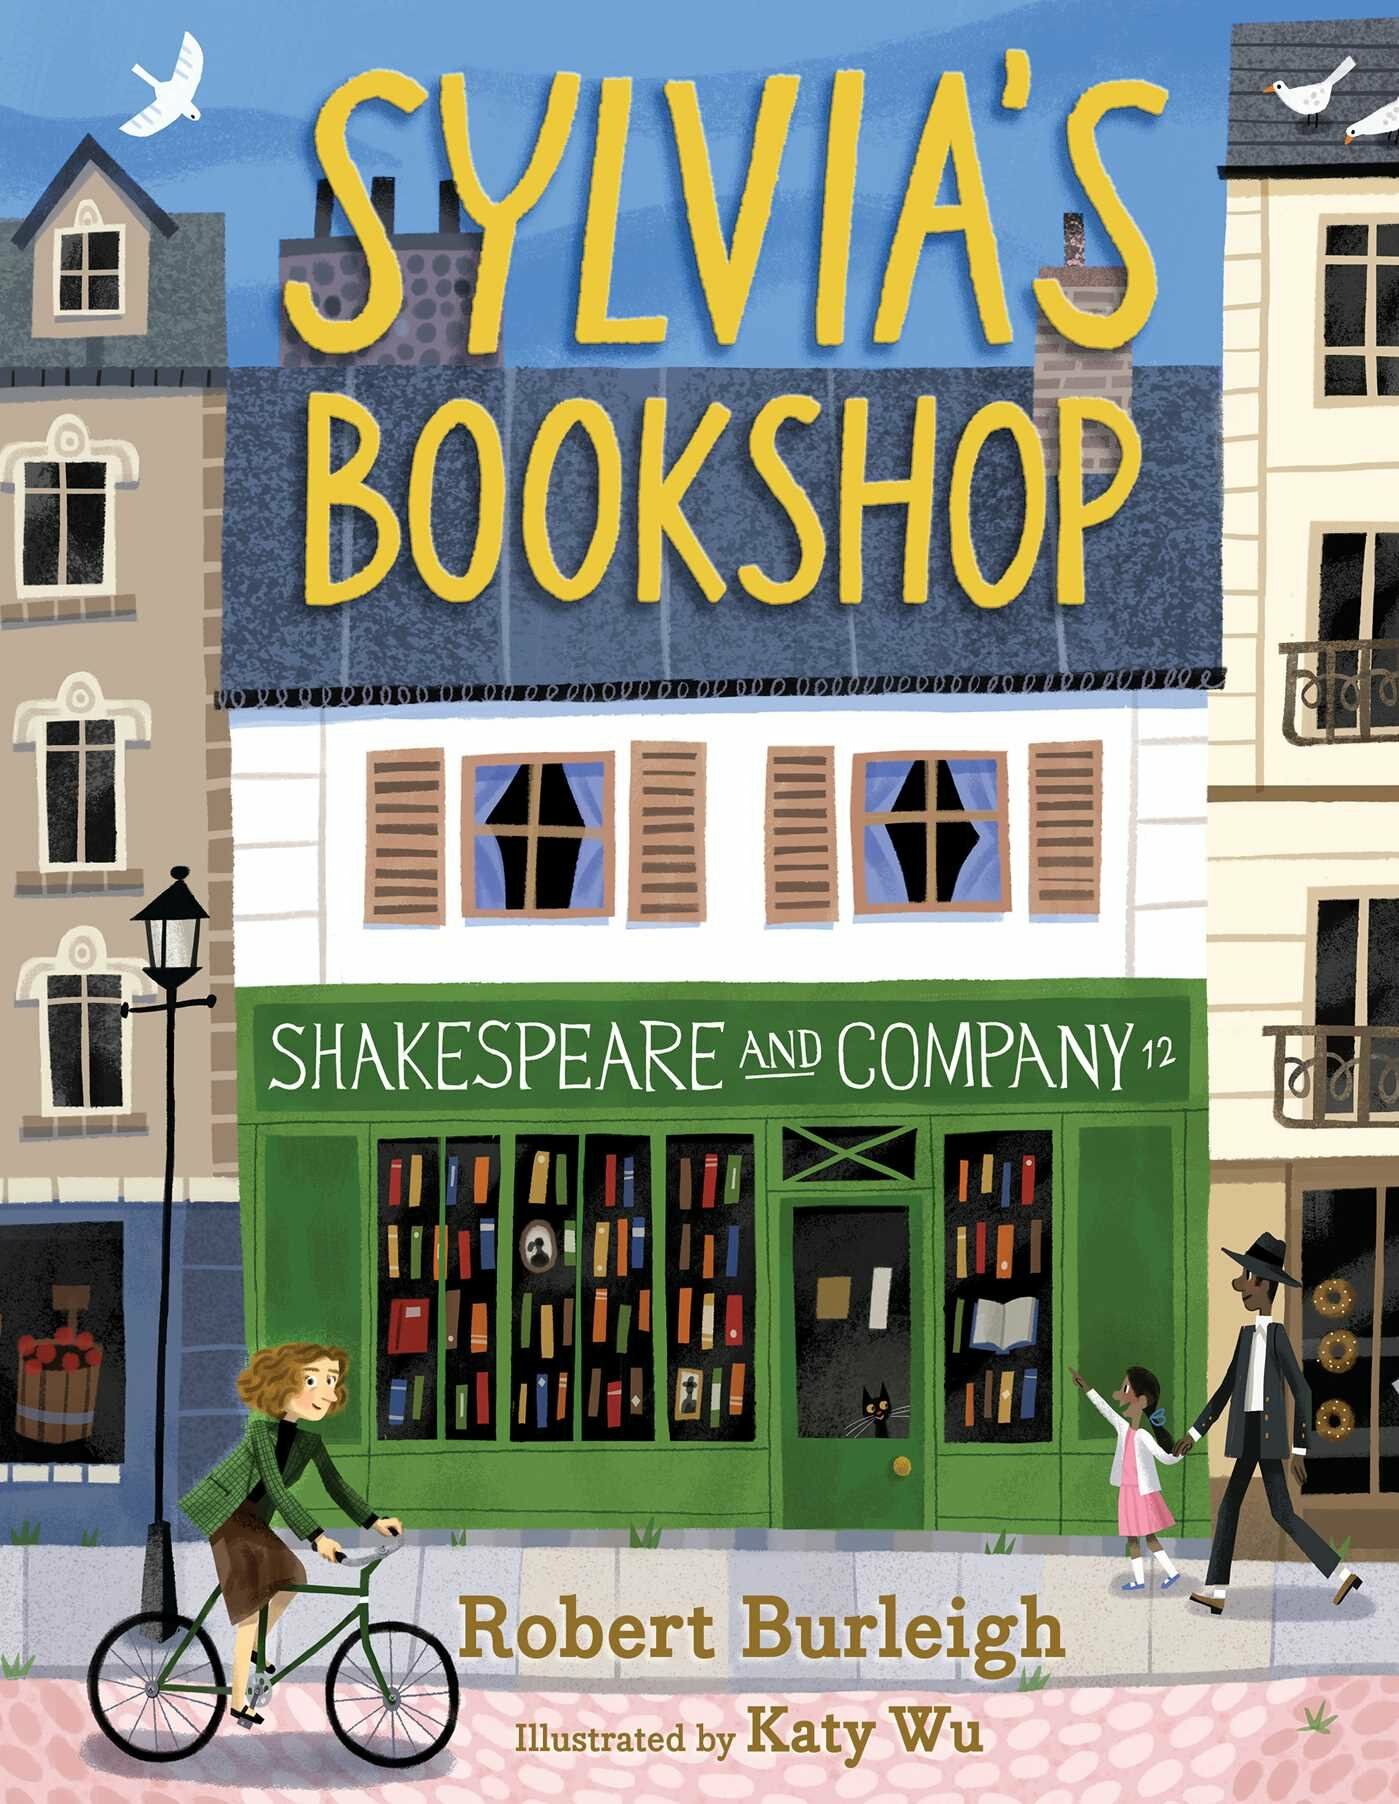 Sylvias Bookshop: The Story of Pariss Beloved Bookstore and Its Founder (as Told by the Bookstore Itself!) (Hardcover)